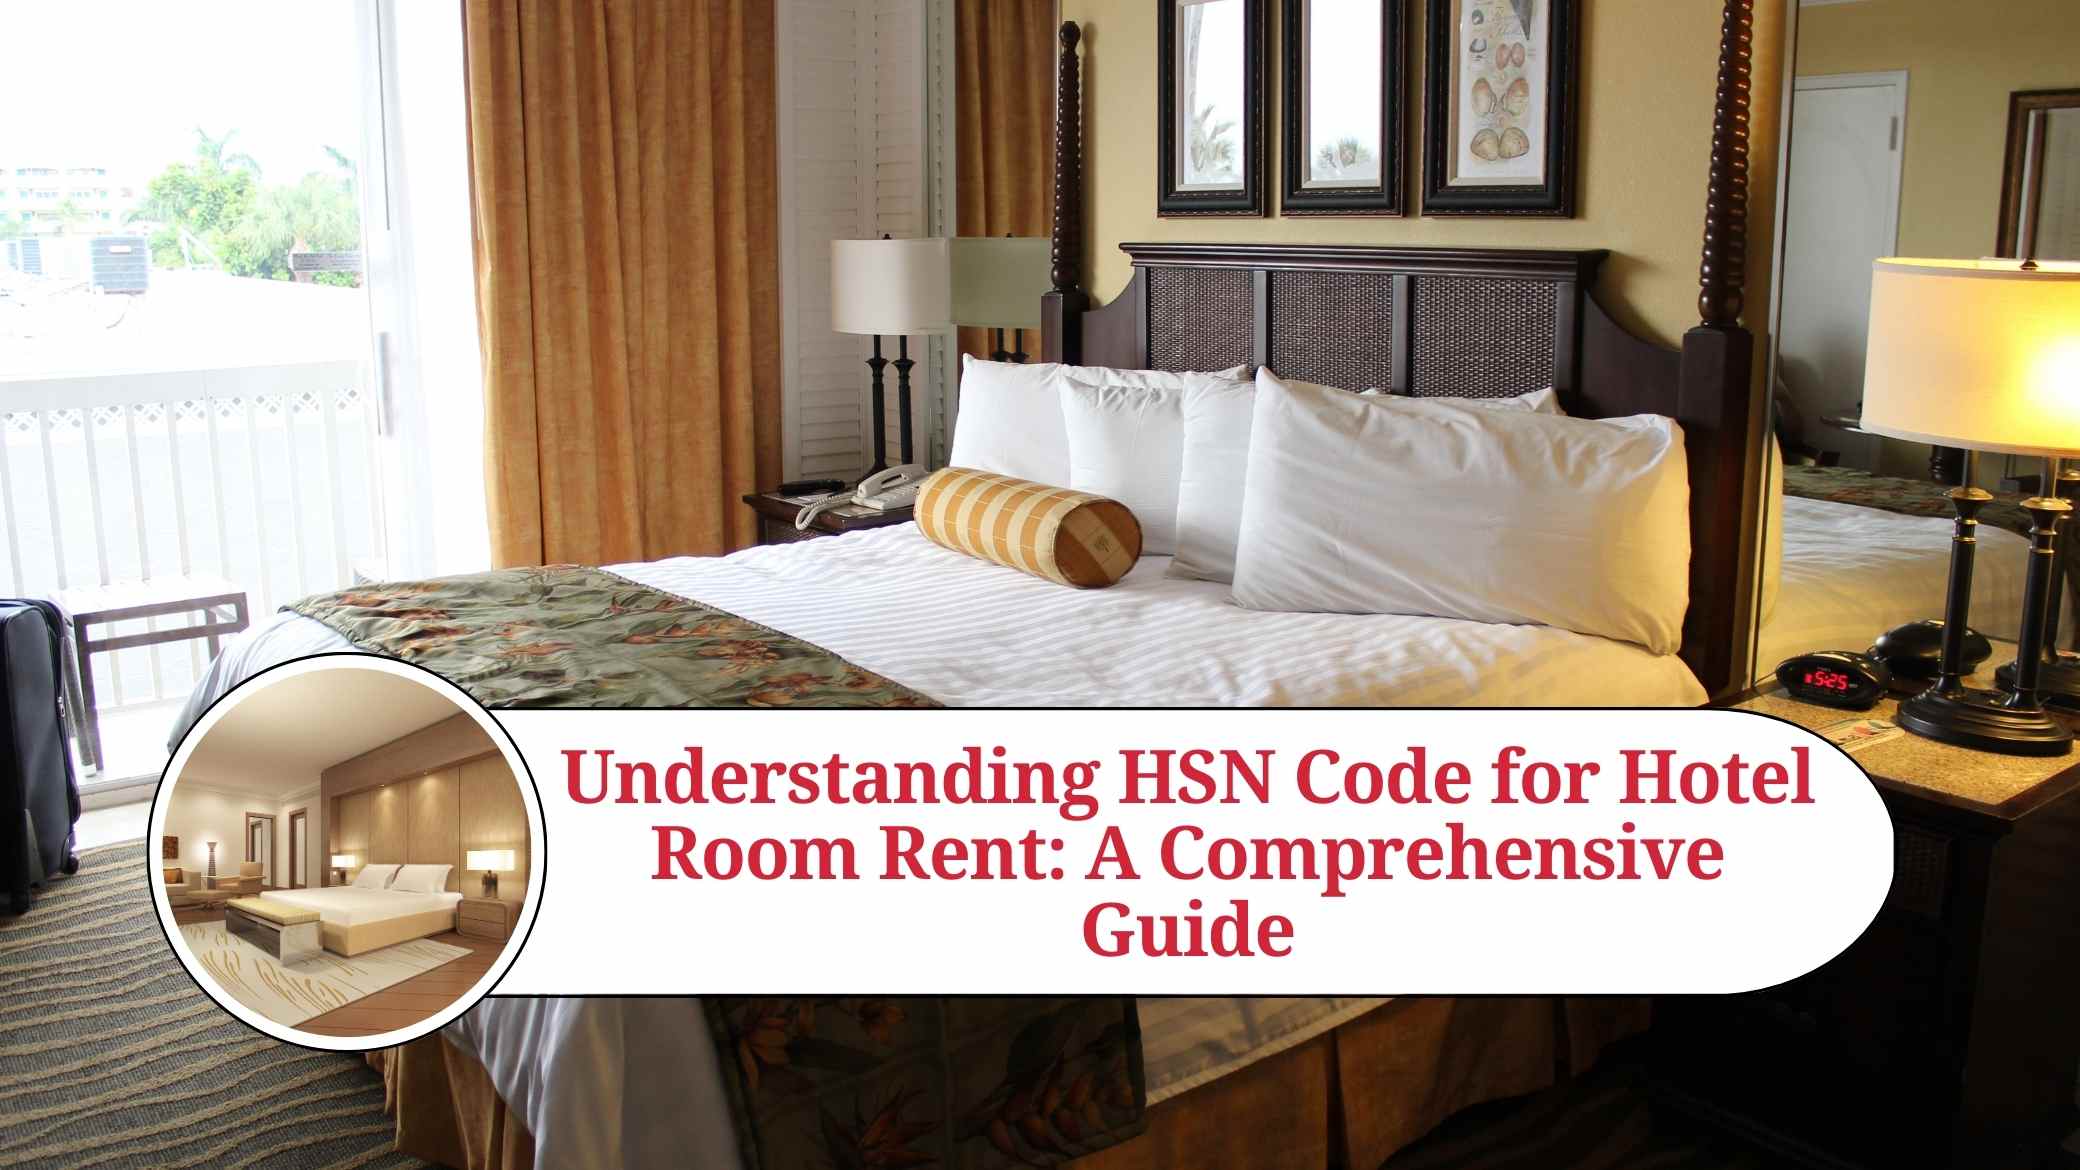 Different Types of Hotel Rooms - The Ultimate Guide